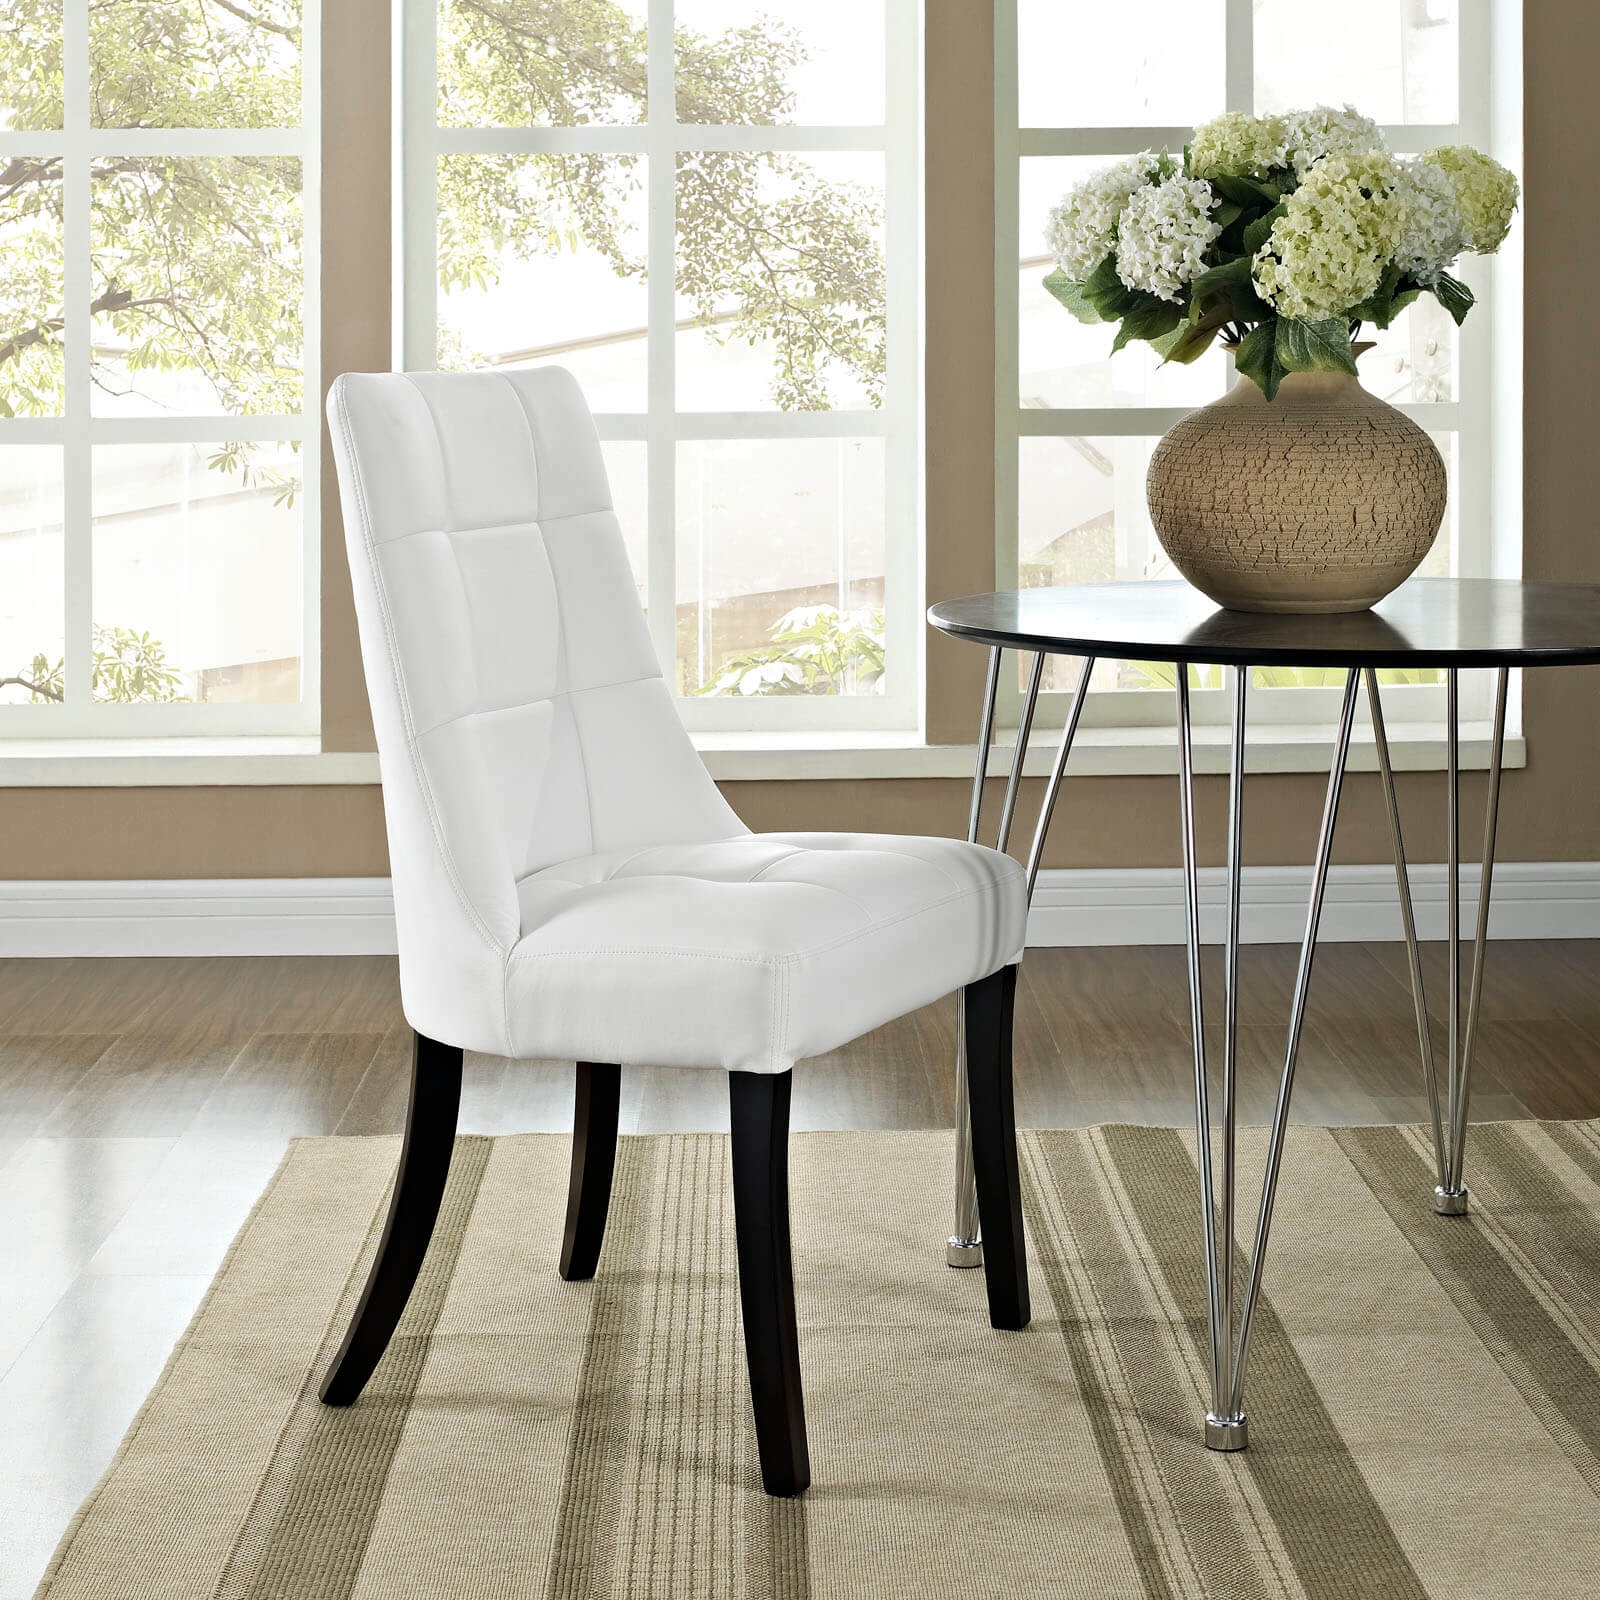 Upholstered dining chair environmental